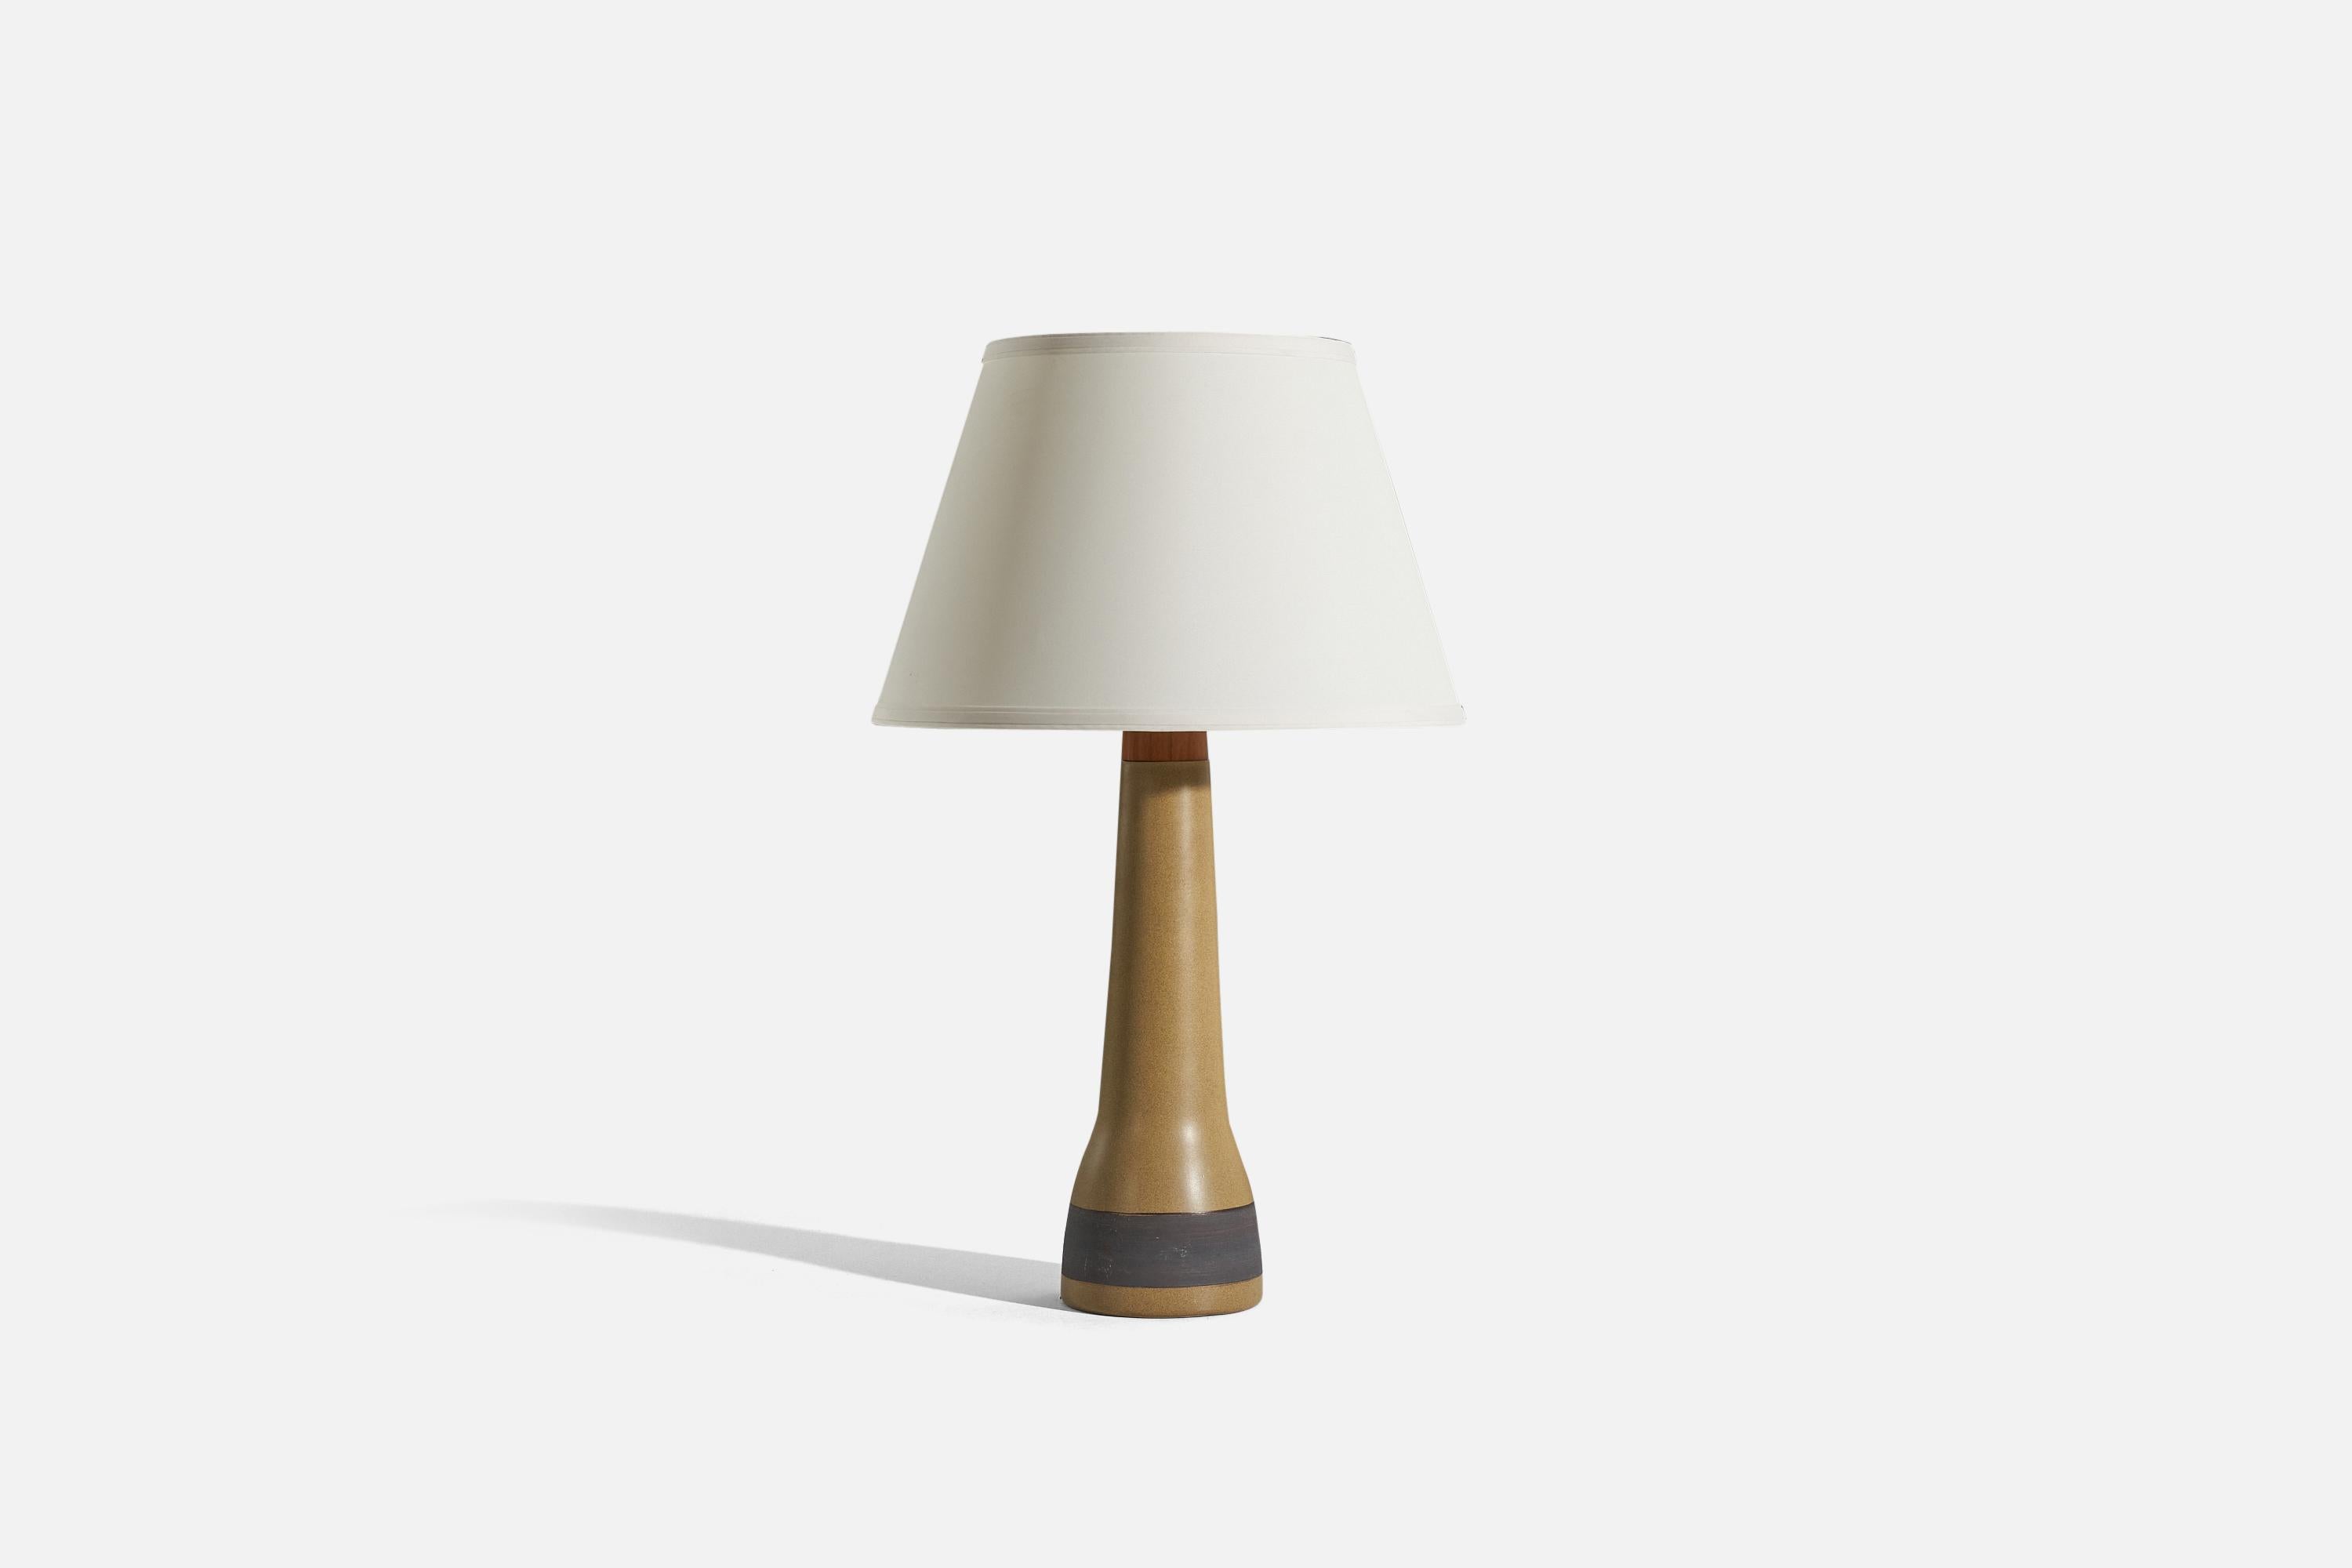 A ceramic and walnut table lamp designed by Jane & Gordon Martz and produced by Marshall Studios, Indianapolis, 1960s. 

Sold without lampshade. 
Dimensions of lamp (inches) : 25.25 x 6.25 x 6.25 (H x W x D)
Dimensions of shade (inches) : 11 x